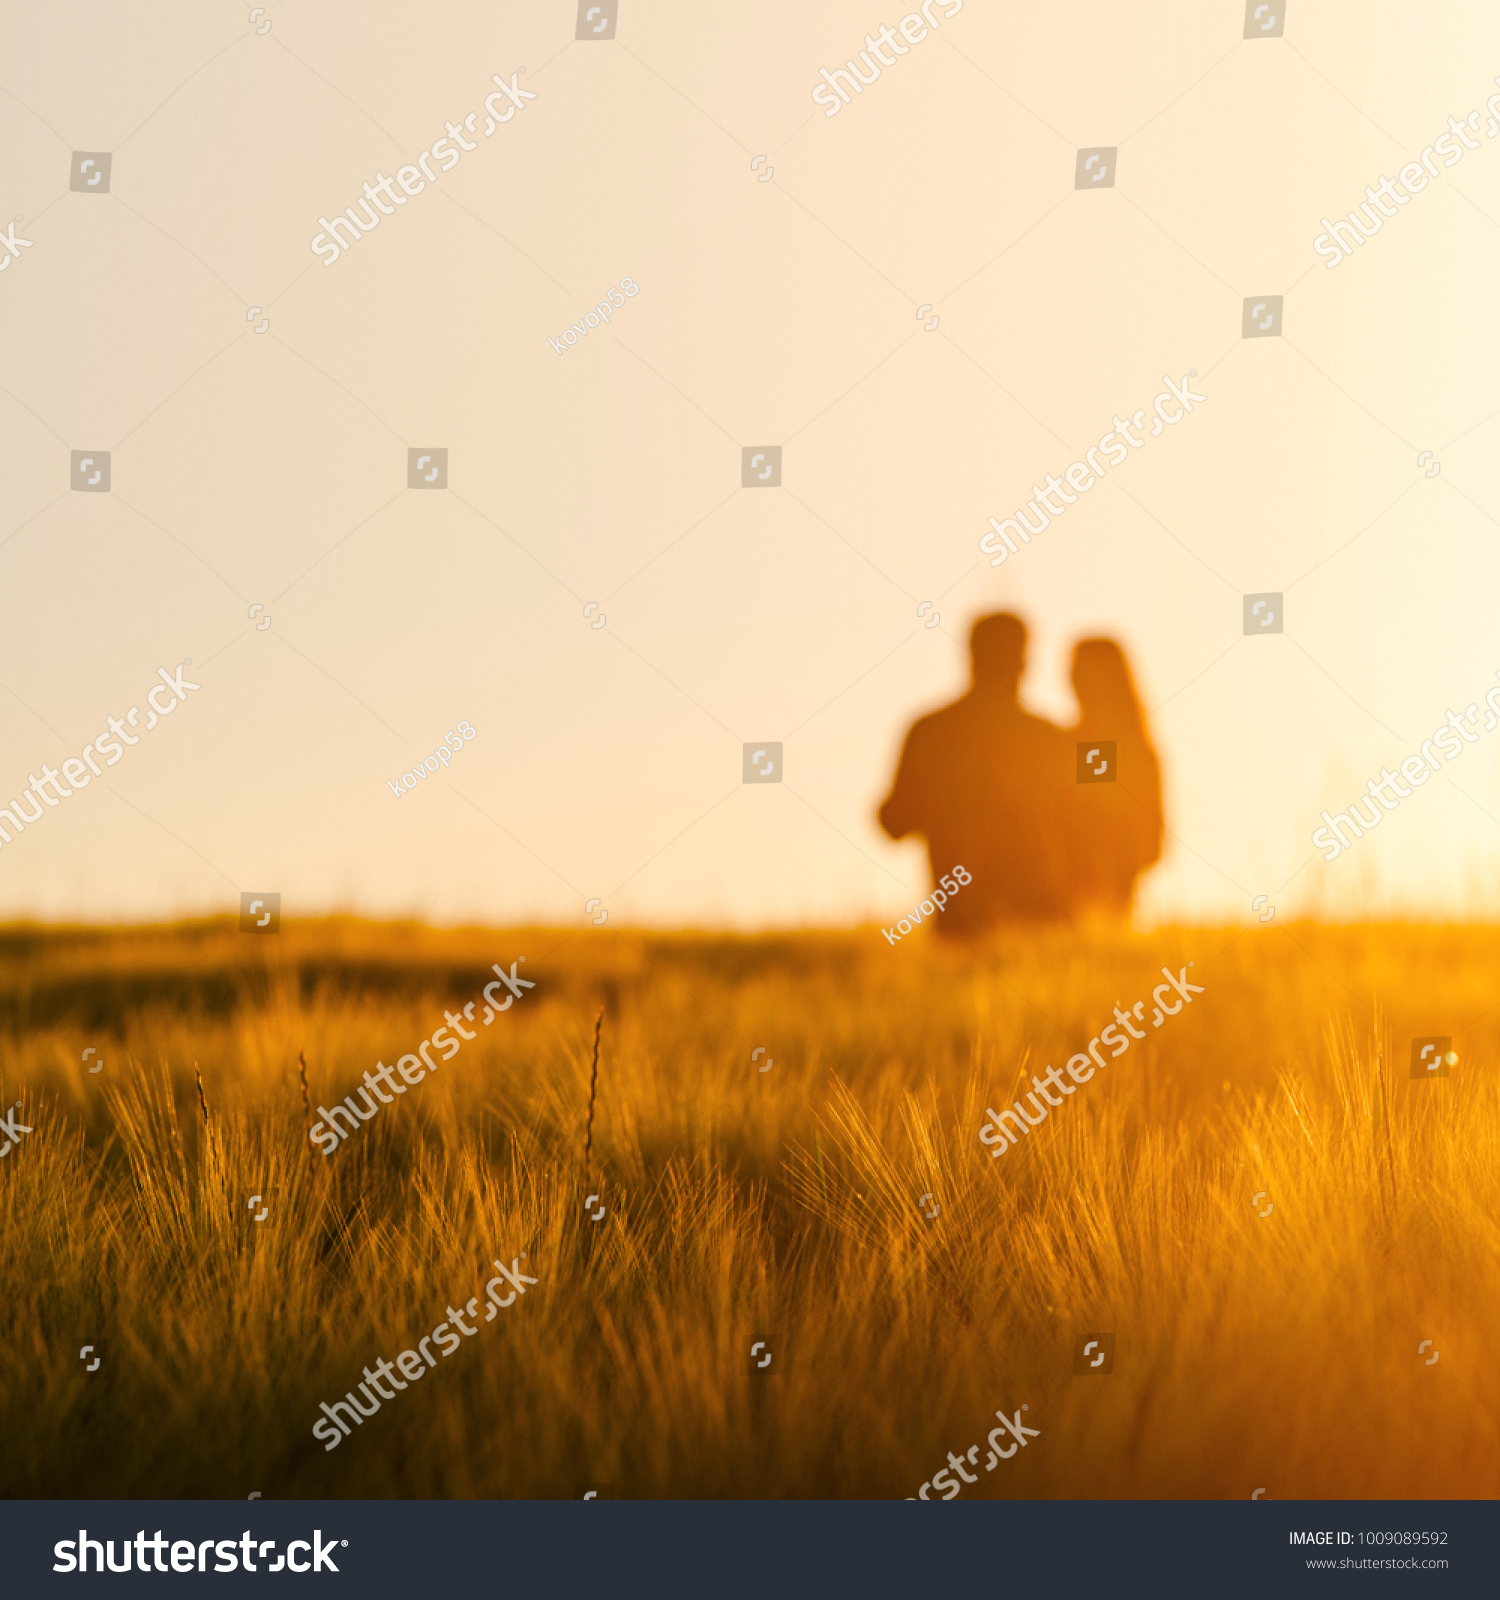 Couple in love dancing together in gold wheat field #1009089592